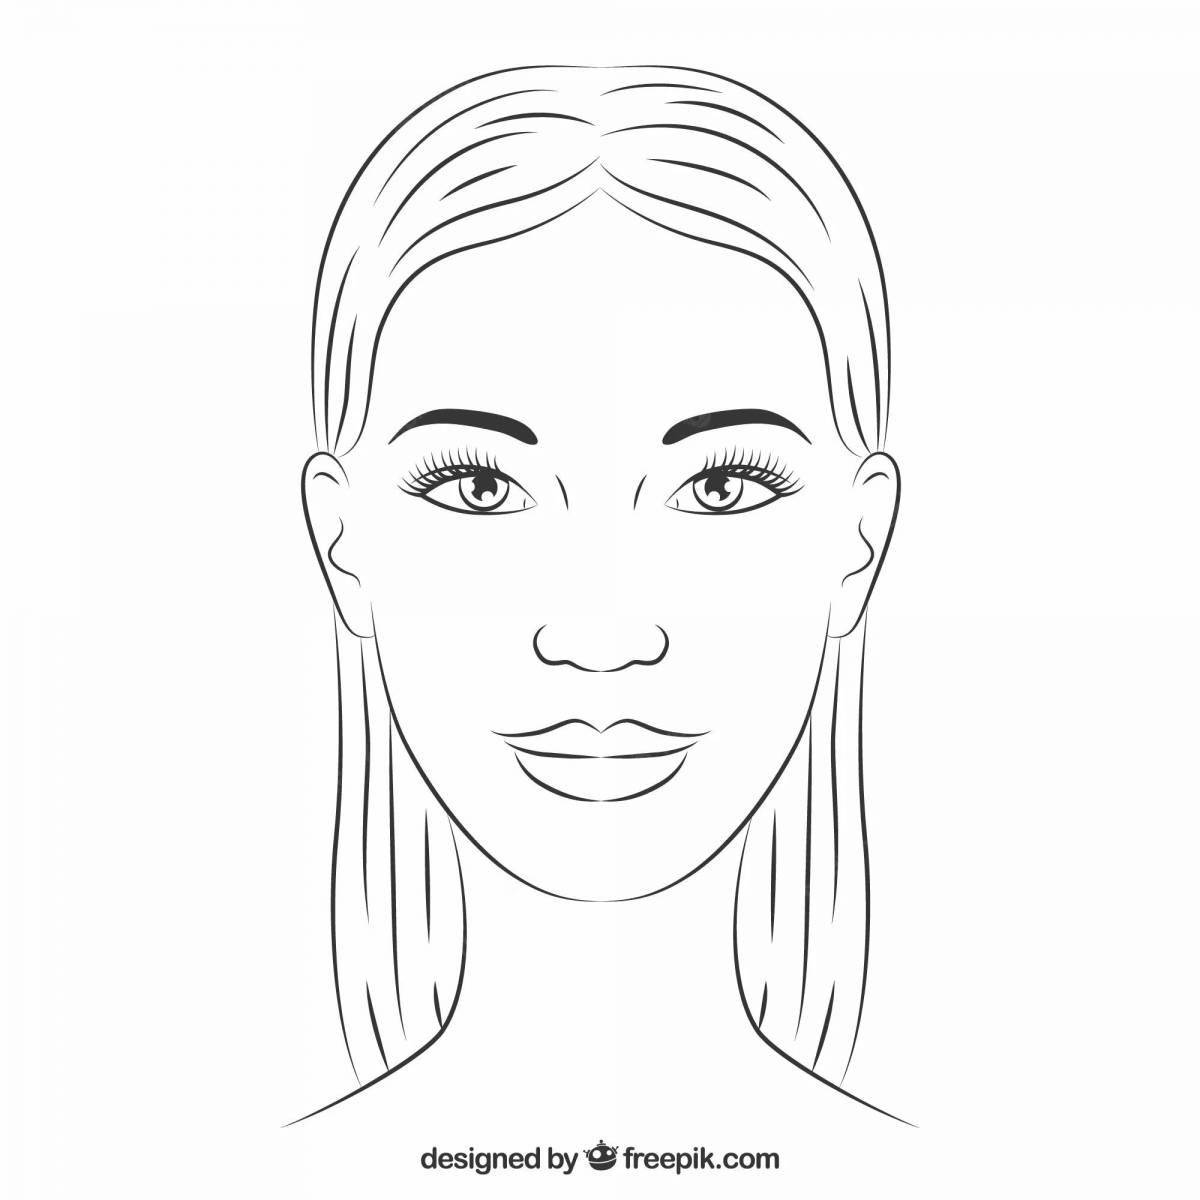 Great drawing of a human face